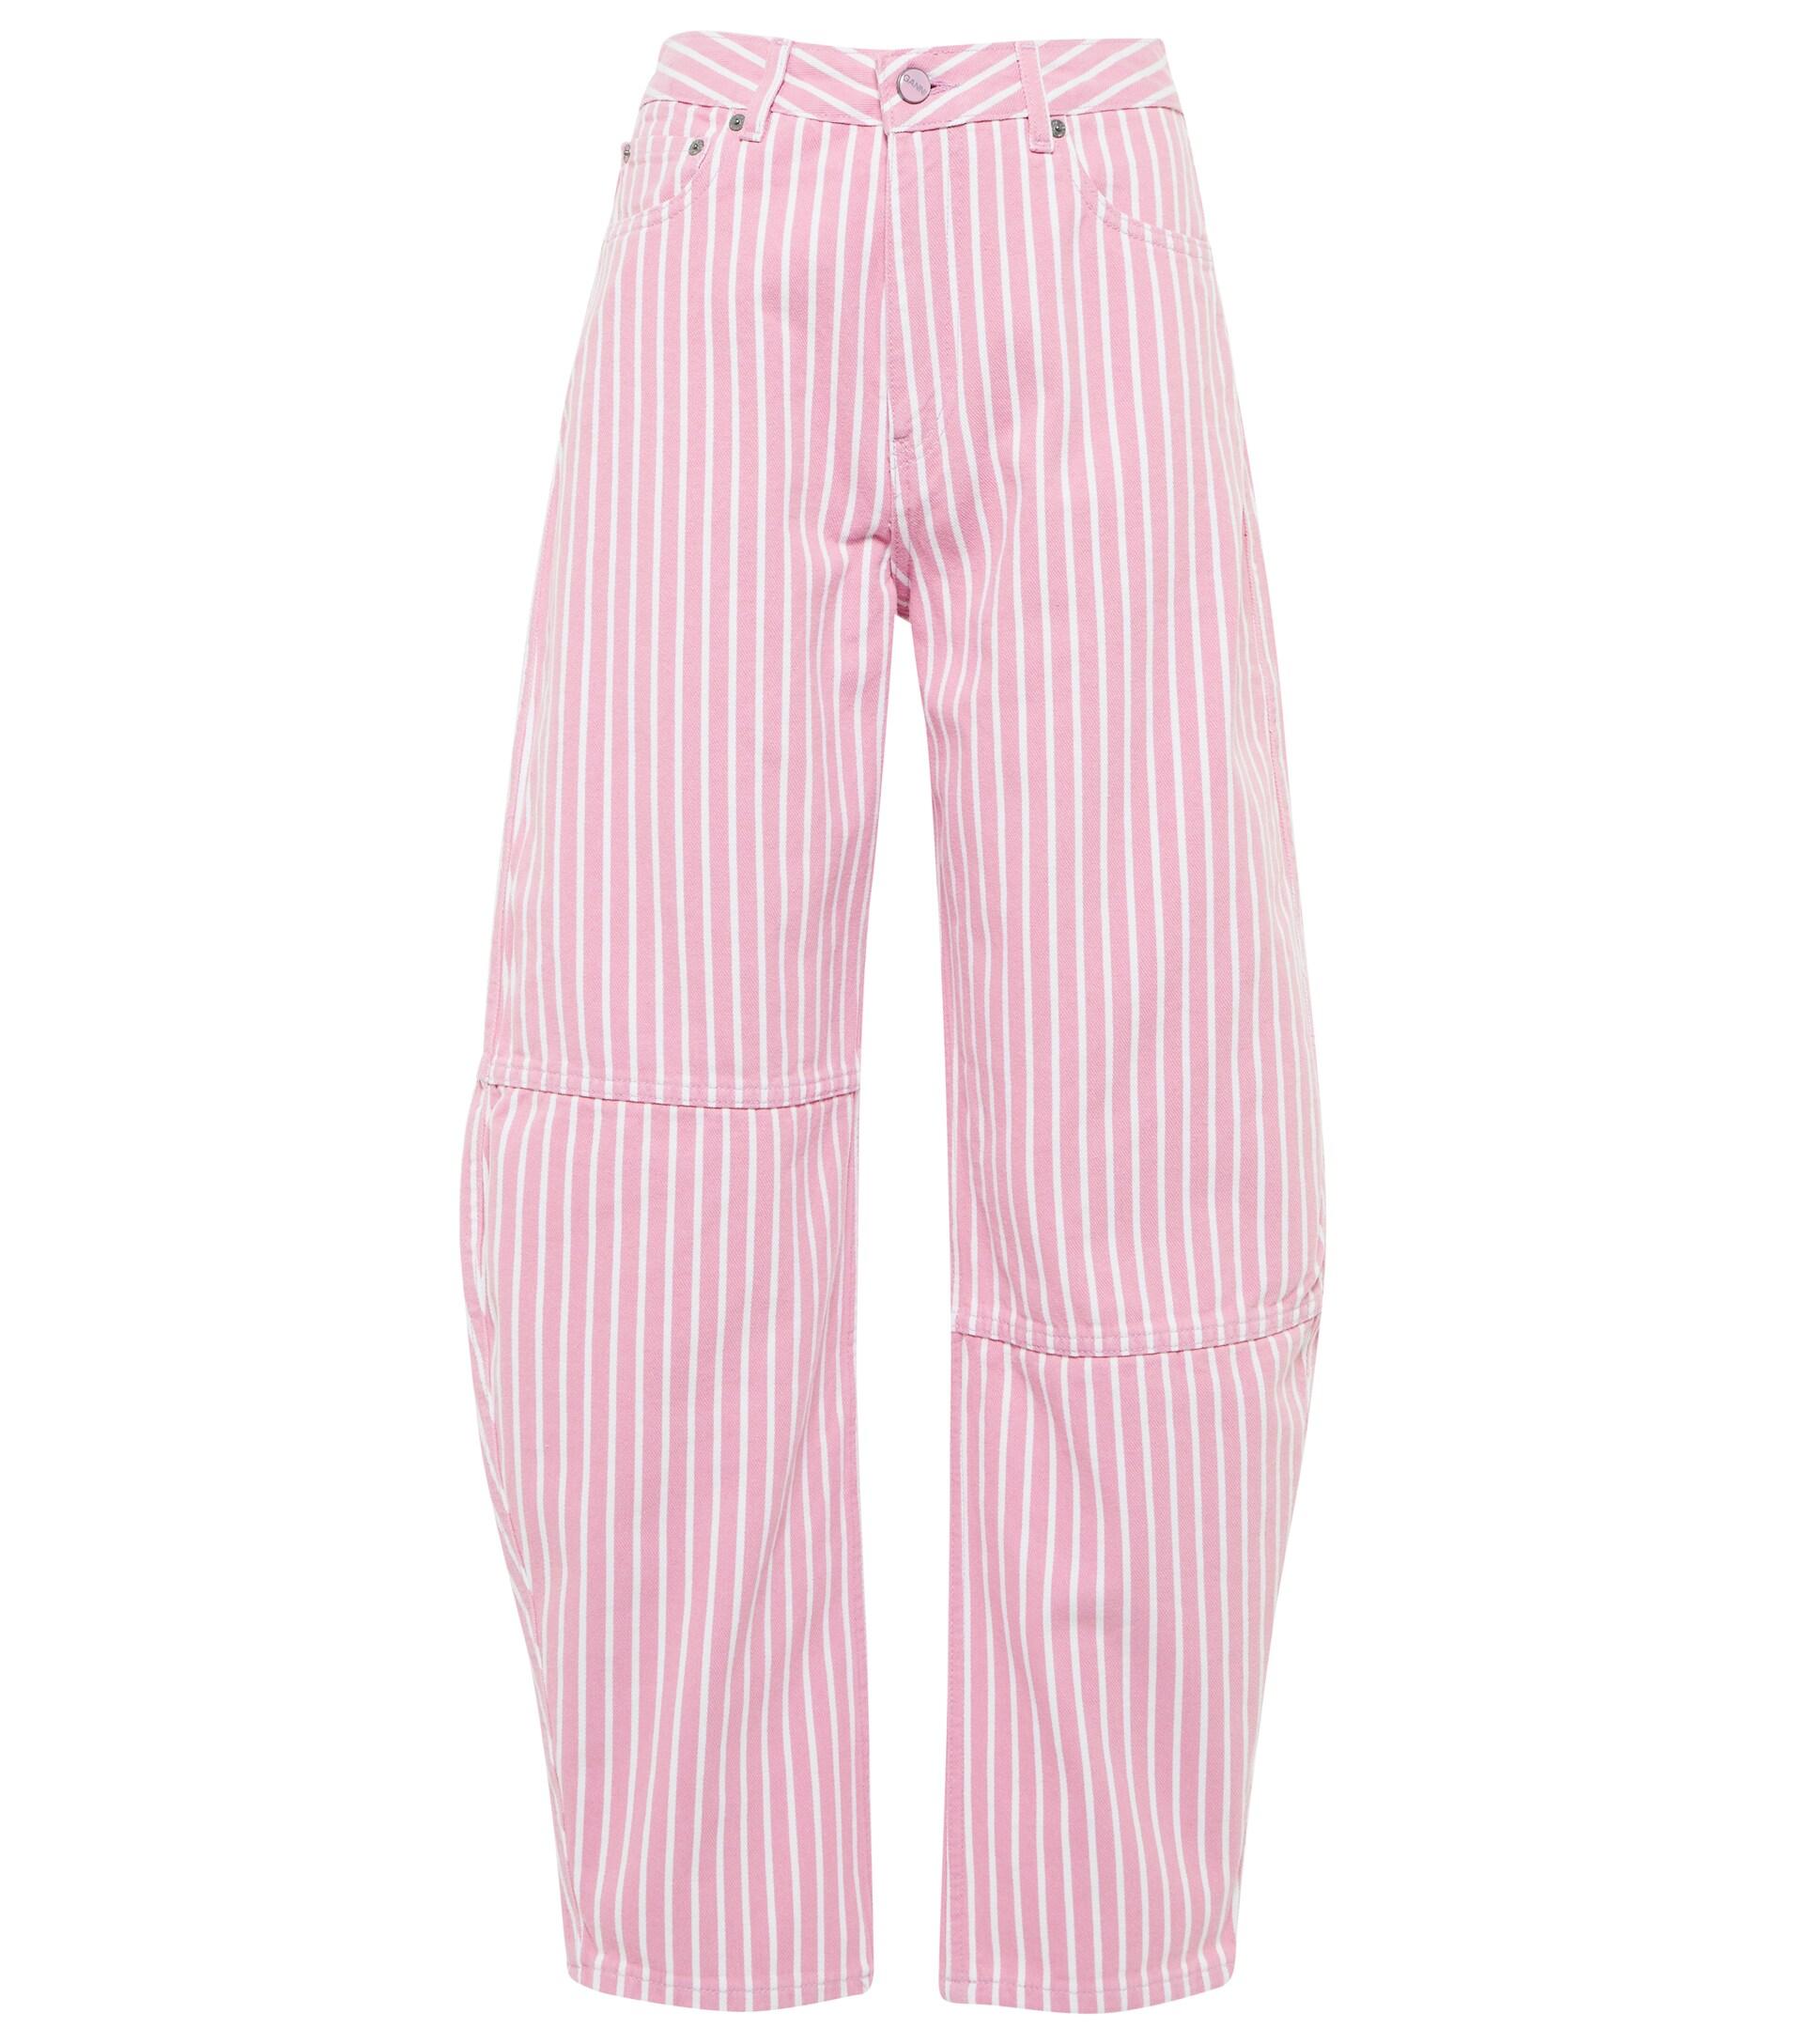 Ganni Stary Striped High-rise Jeans in Pink | Lyst